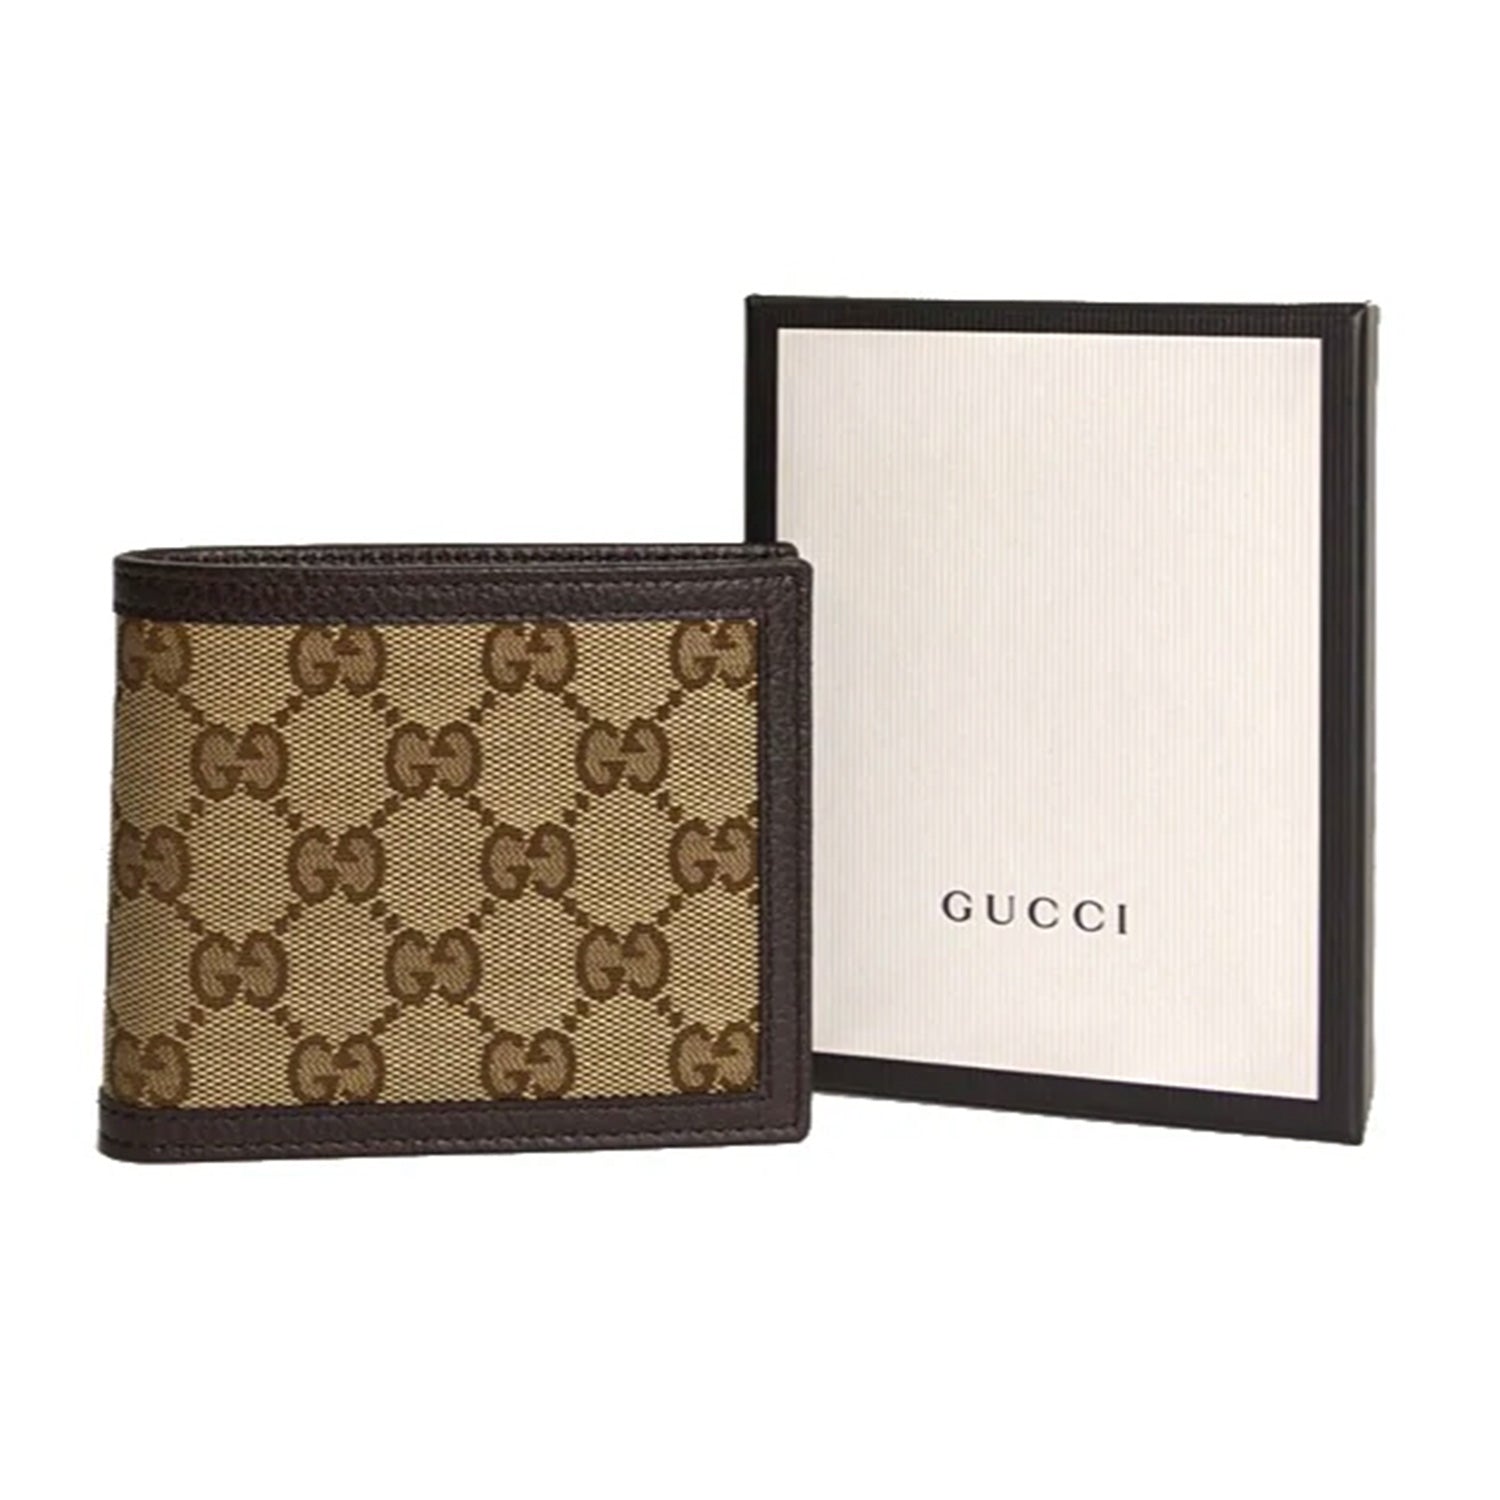 Authentic New Gucci Brown Microguccissima Leather Bi-Fold Men's Wallet 260987